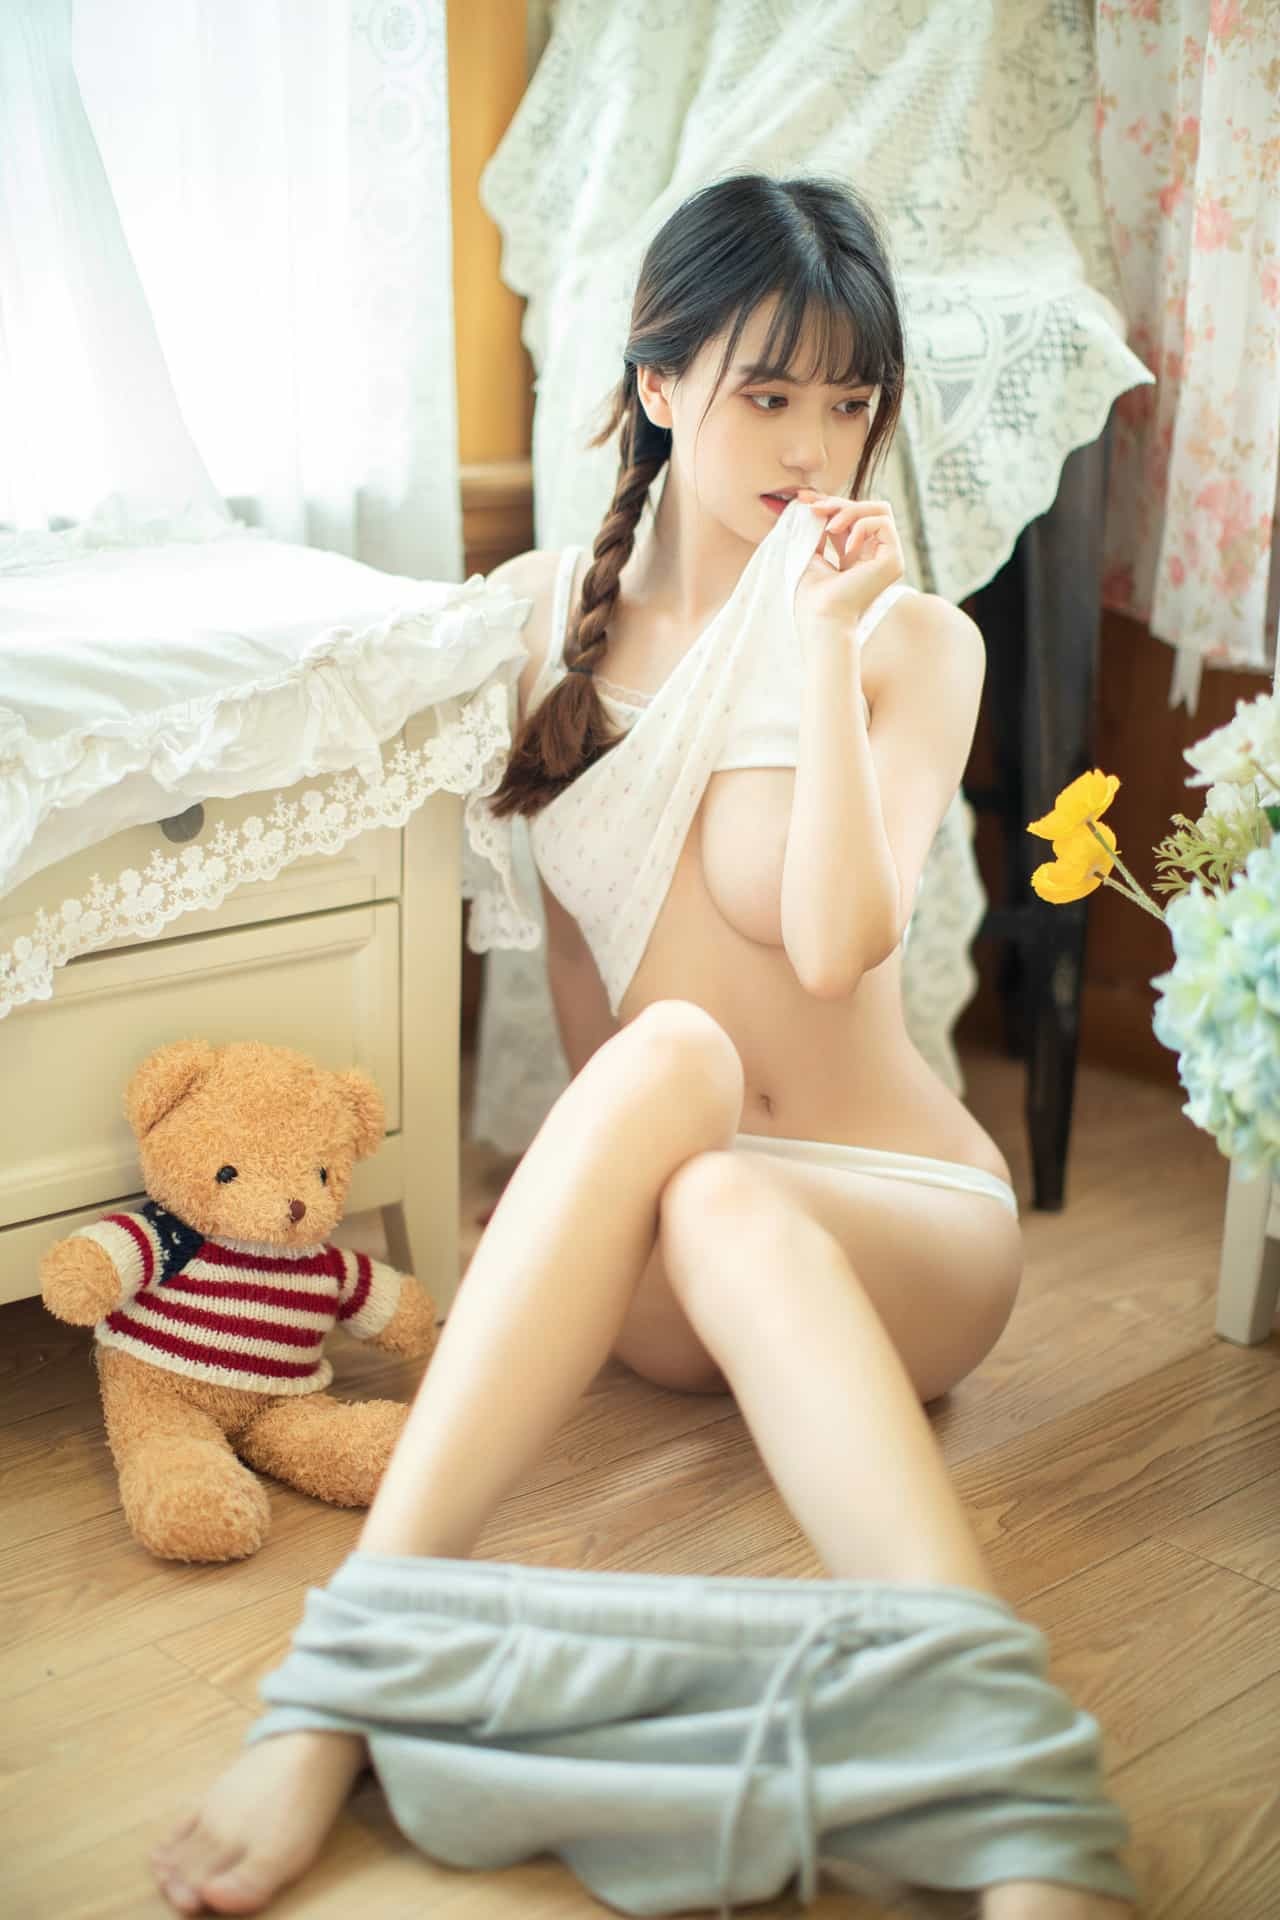 Ultra-pure Twitter-faced beautiful girl private shot Lao Xiaobai&#39;s sexy curves and tender honey milk - the girl next door